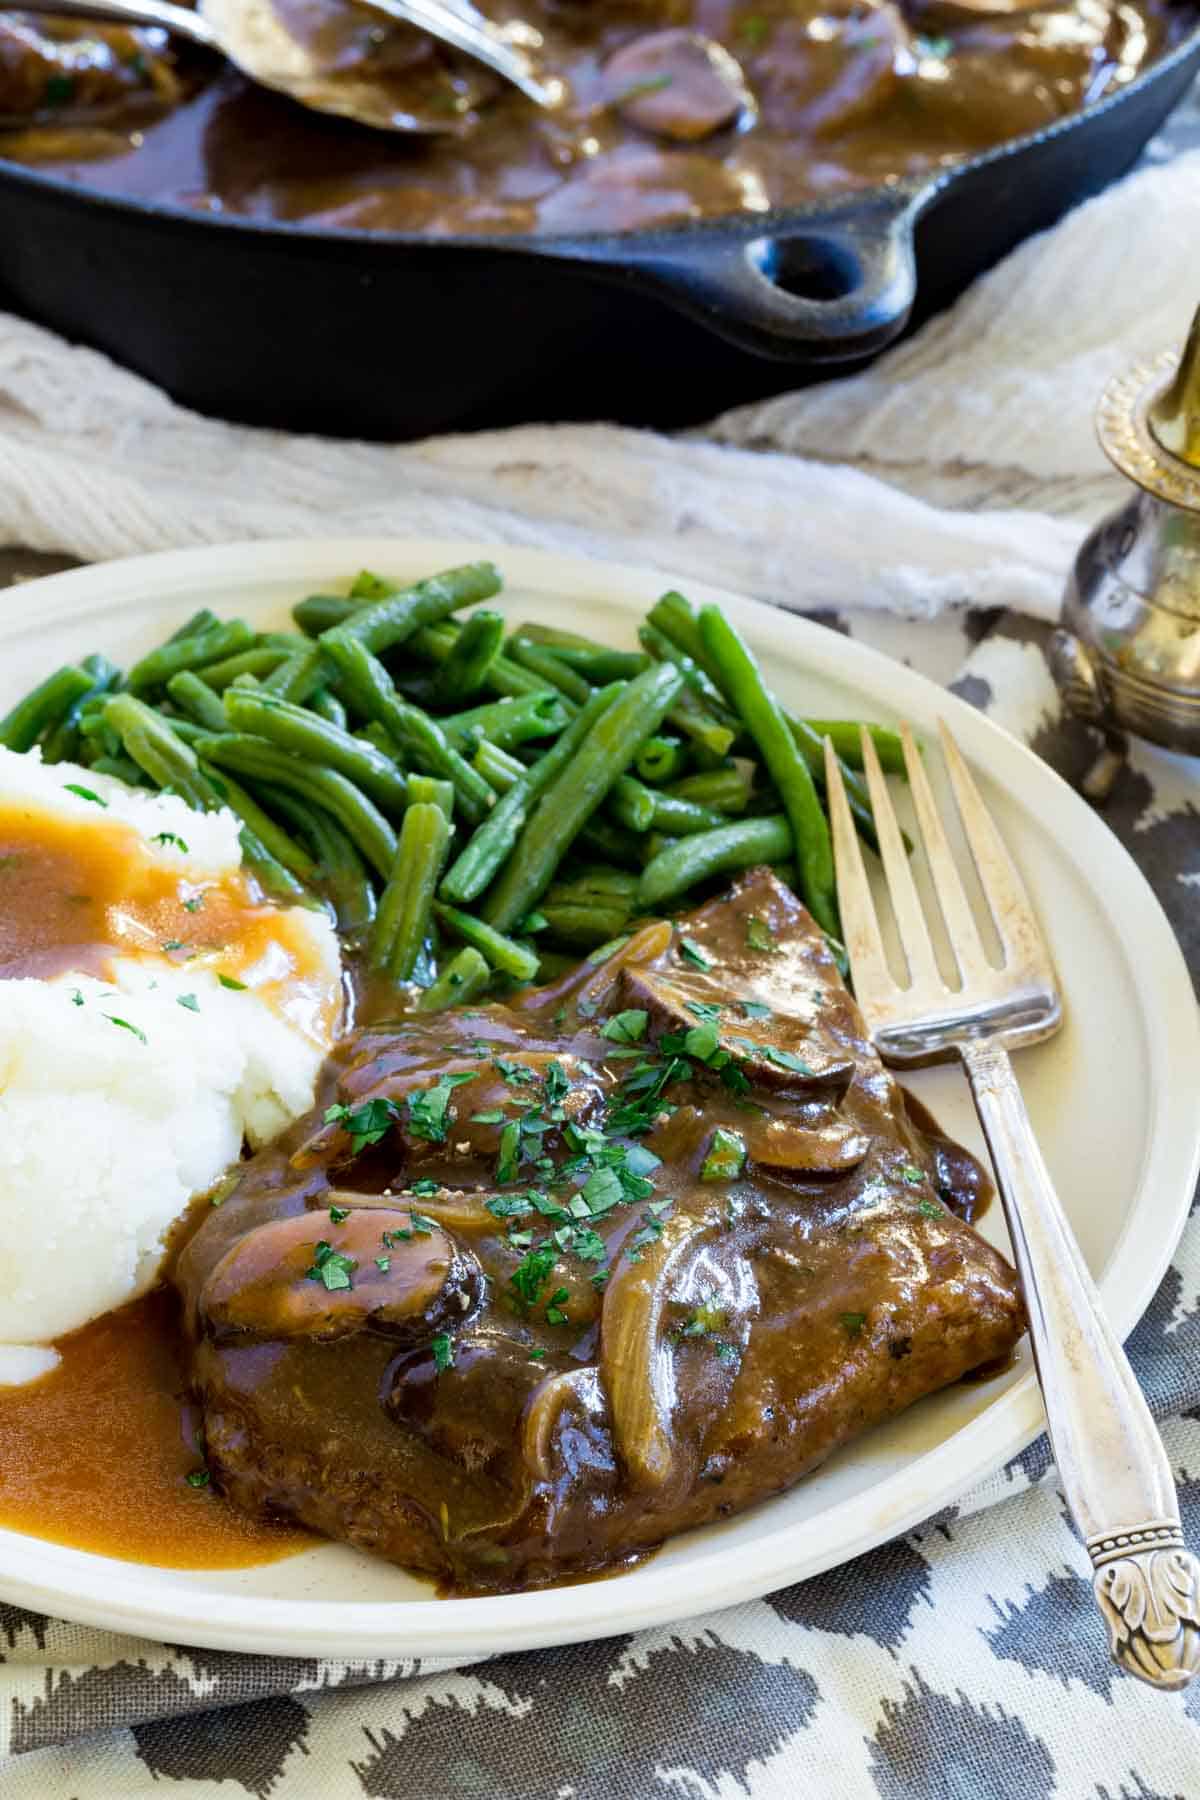 Gluten-free cube steak with gravy topped with mushrooms and onions on a plate next to mashed potatoes and green beans, with a fork.